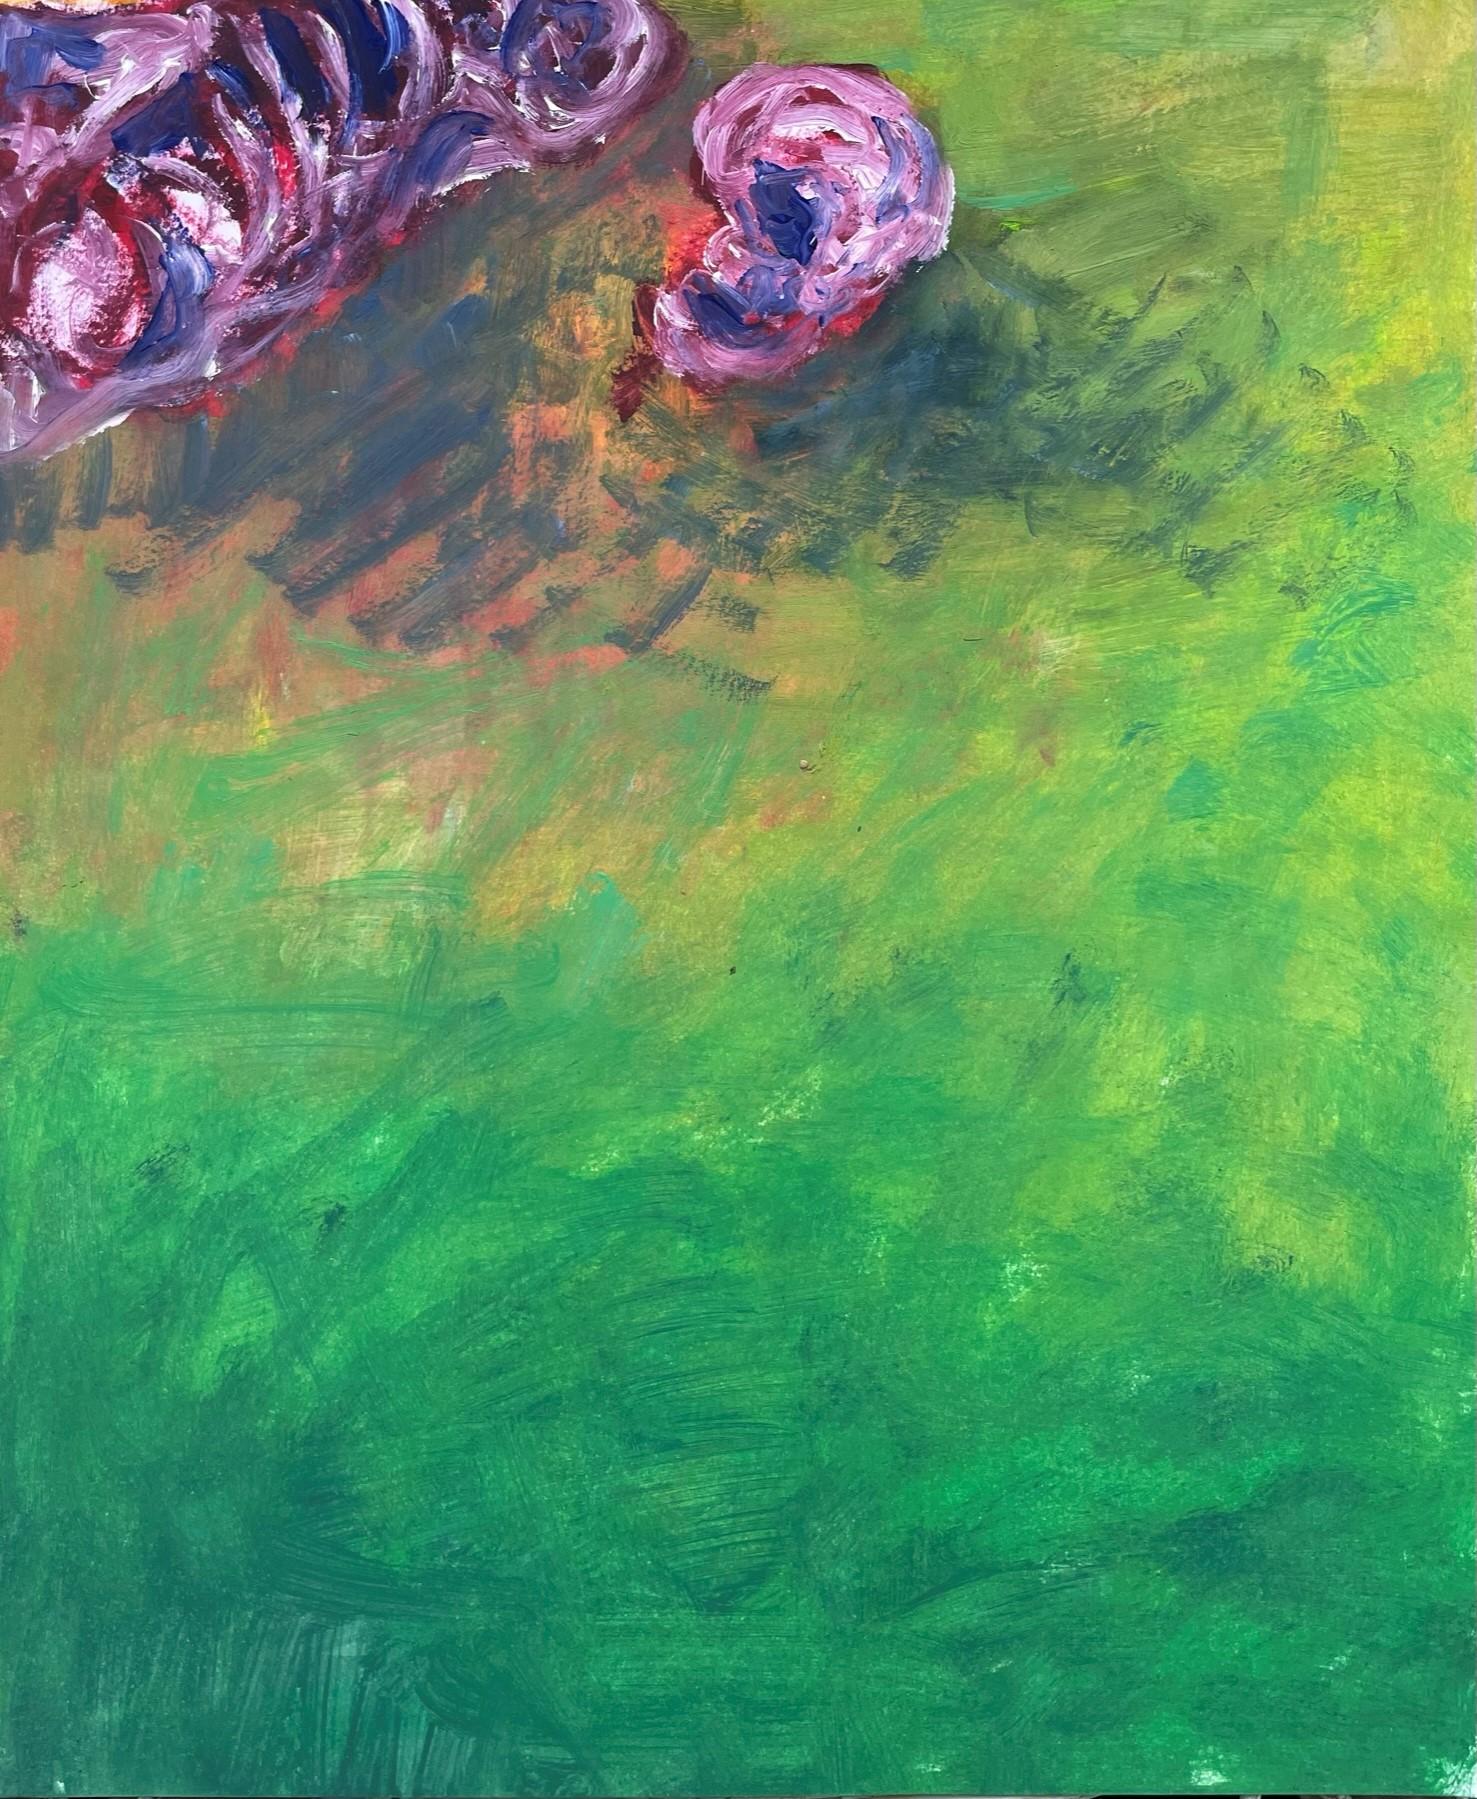 Remains (Body in the Field 14) - Contemporary, Green, Yellow, Pink, 21st Century - Abstract Expressionist Art by Zsolt Berszán